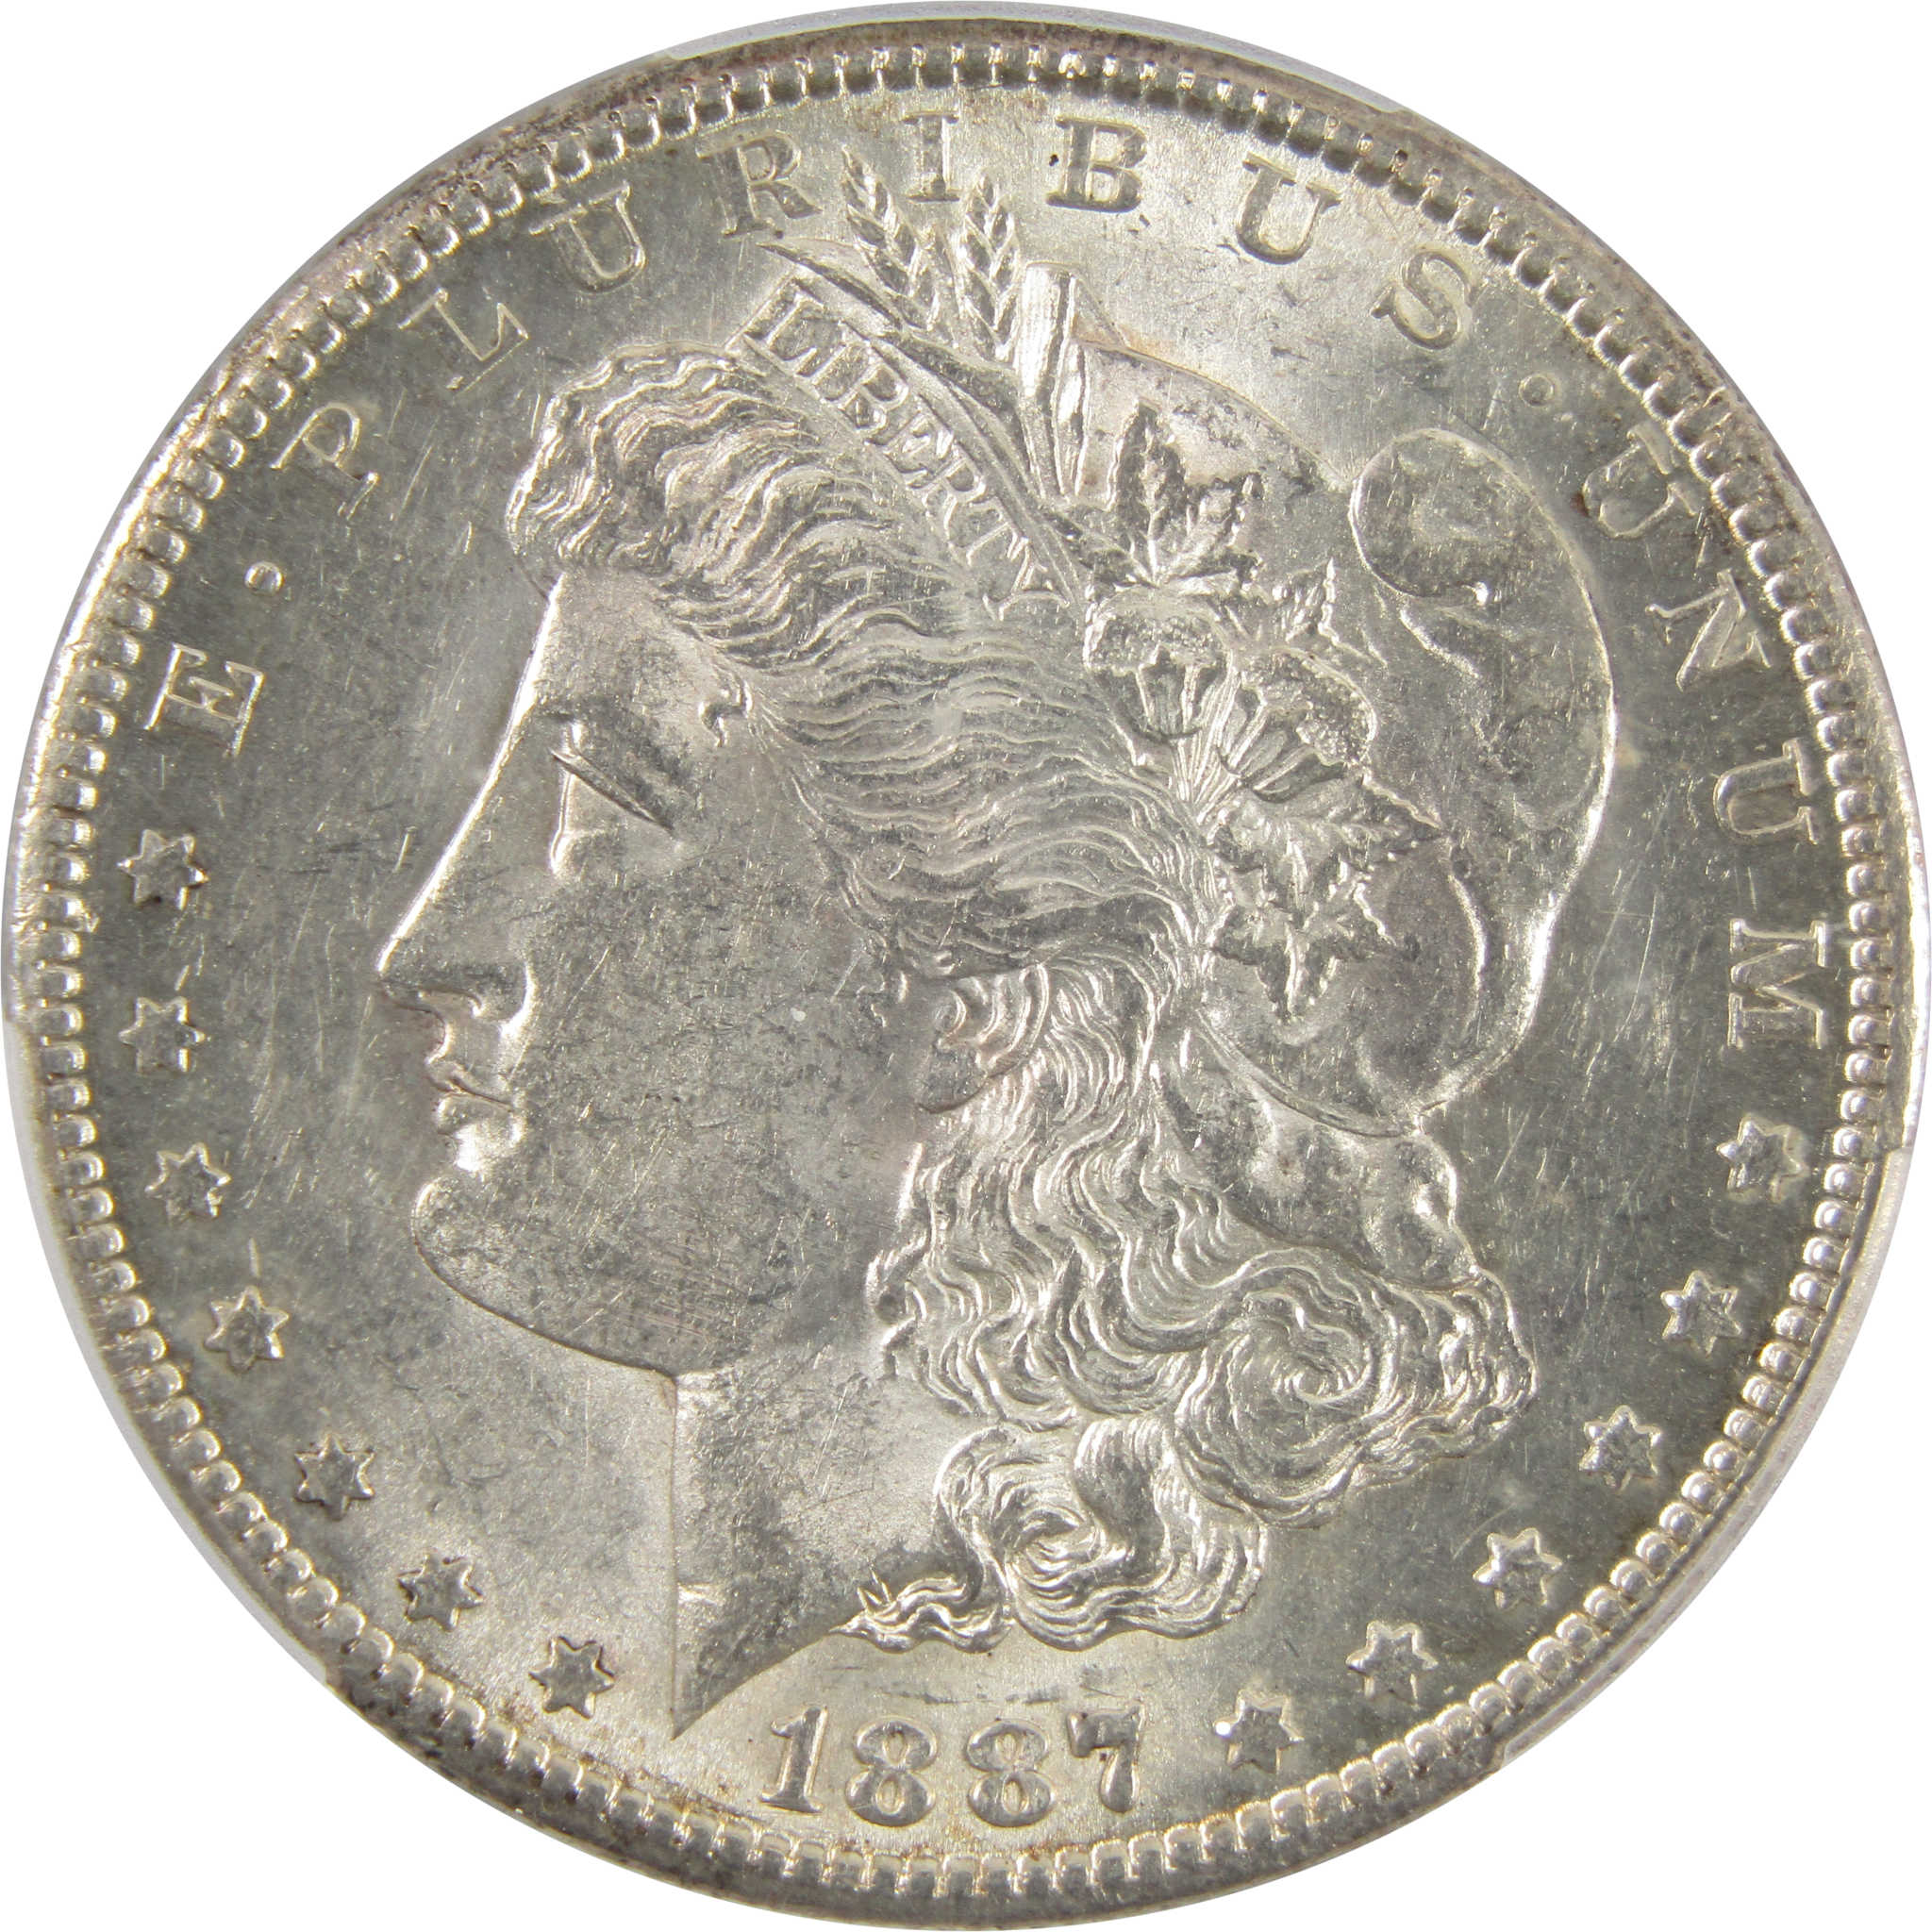 1887 S Morgan Dollar AU 55 PCGS 90% Silver $1 Coin SKU:I11256 - Morgan coin - Morgan silver dollar - Morgan silver dollar for sale - Profile Coins &amp; Collectibles